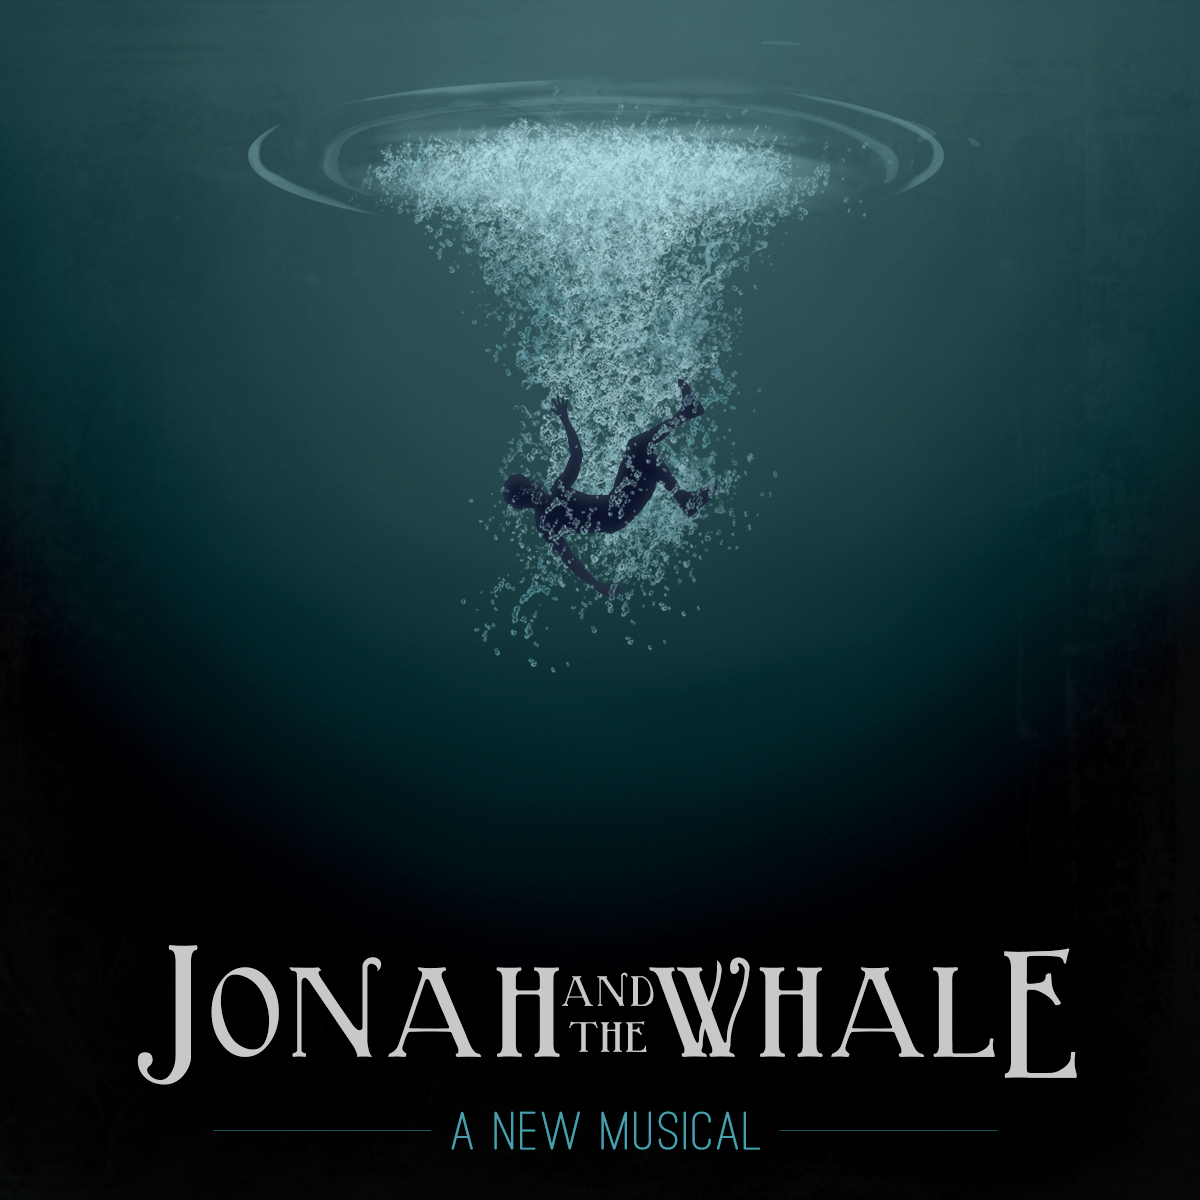 jonah-and-the-whale-twin-cities-song-story-episode-8-twin-cities-song-story-podcast